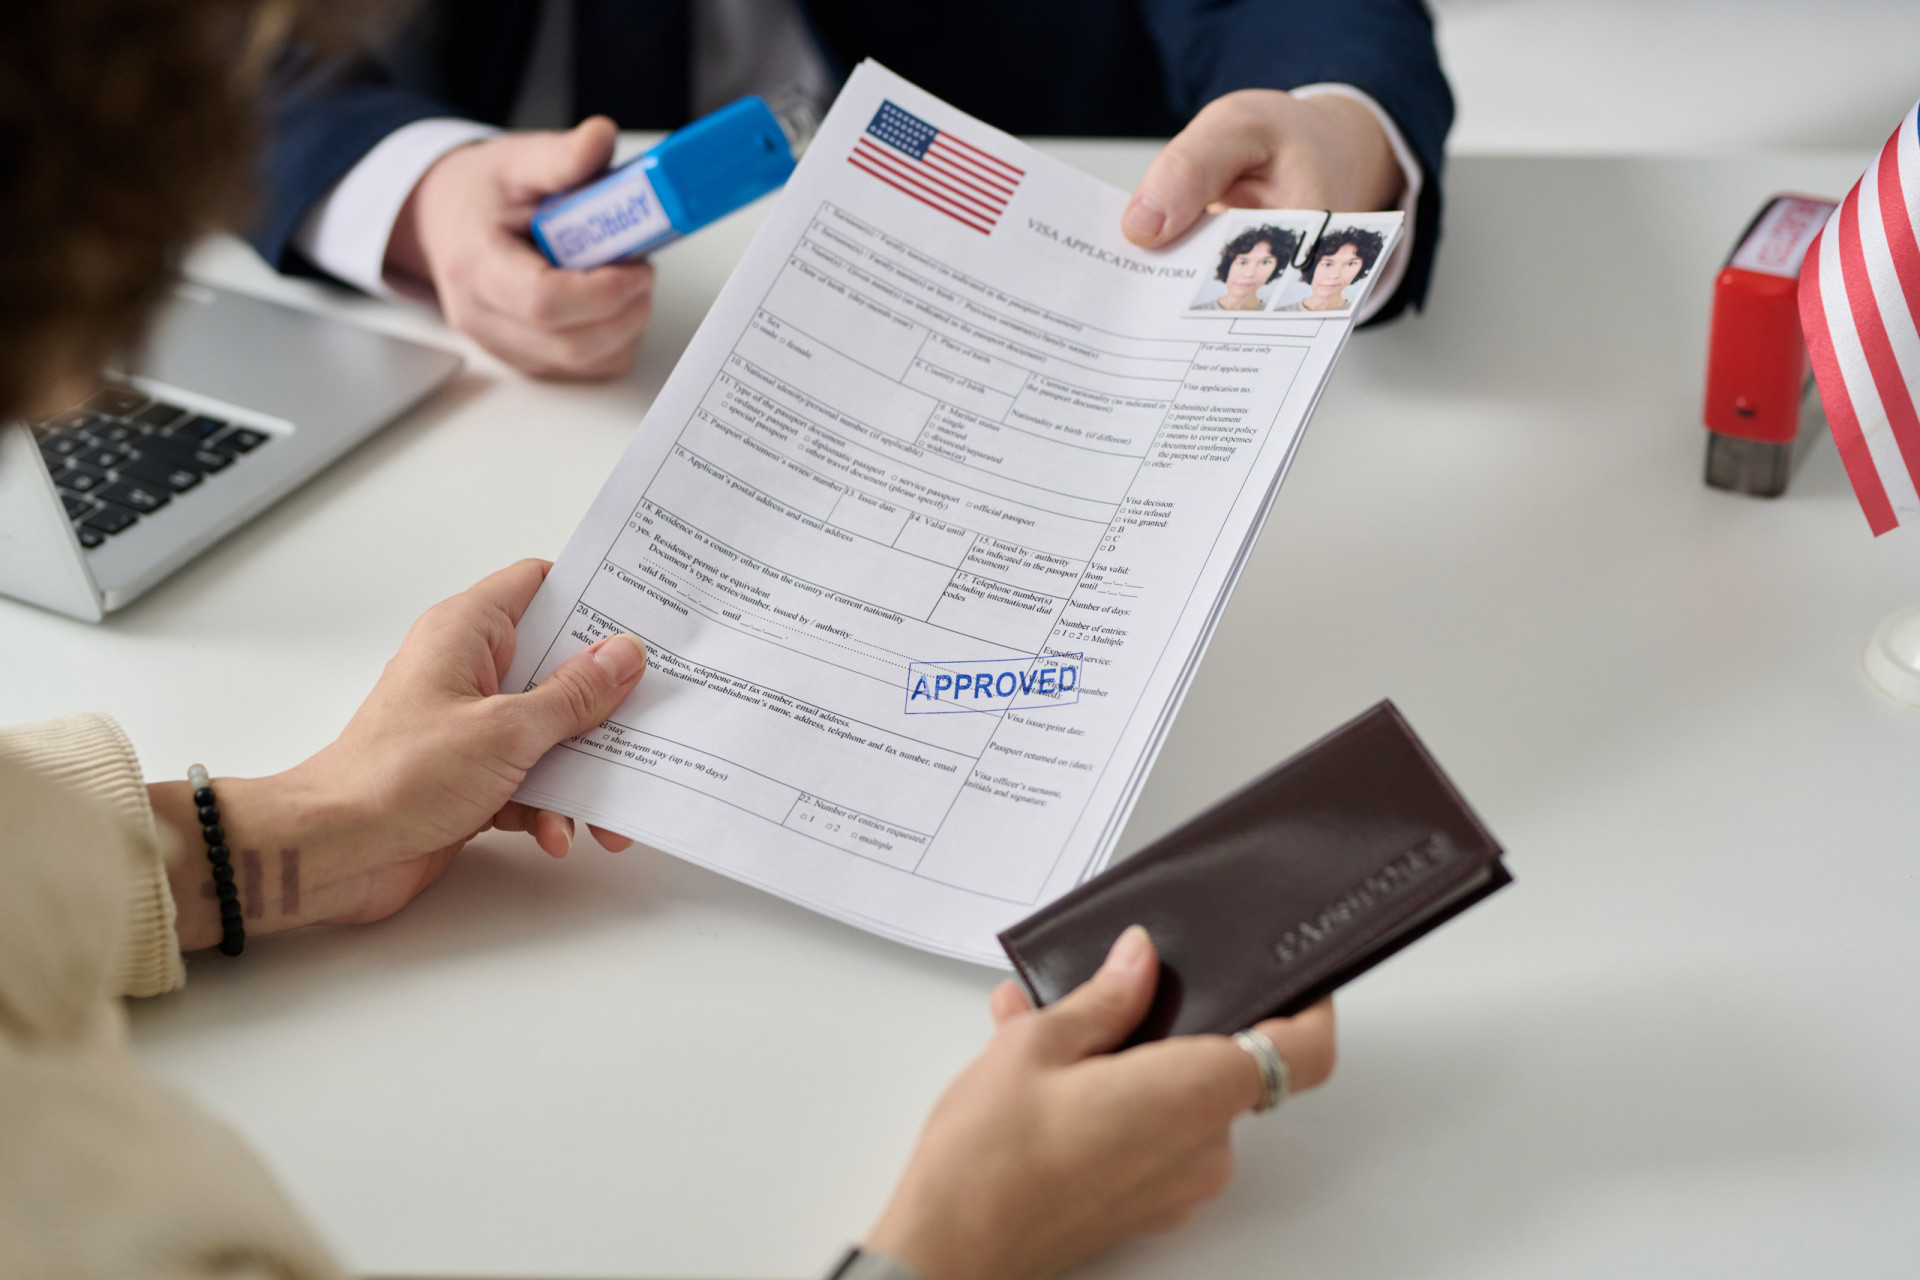 <p>All other green card categories are subject to country caps, and wait times vary dramatically. Indeed, the whole process may take several years, depending on the type of immigrant category and the country of chargeability. And each category requires specific steps and procedures to follow.</p><p><a href="https://www.msn.com/en-us/community/channel/vid-7xx8mnucu55yw63we9va2gwr7uihbxwc68fxqp25x6tg4ftibpra?cvid=94631541bc0f4f89bfd59158d696ad7e">Follow us and access great exclusive content every day</a></p>